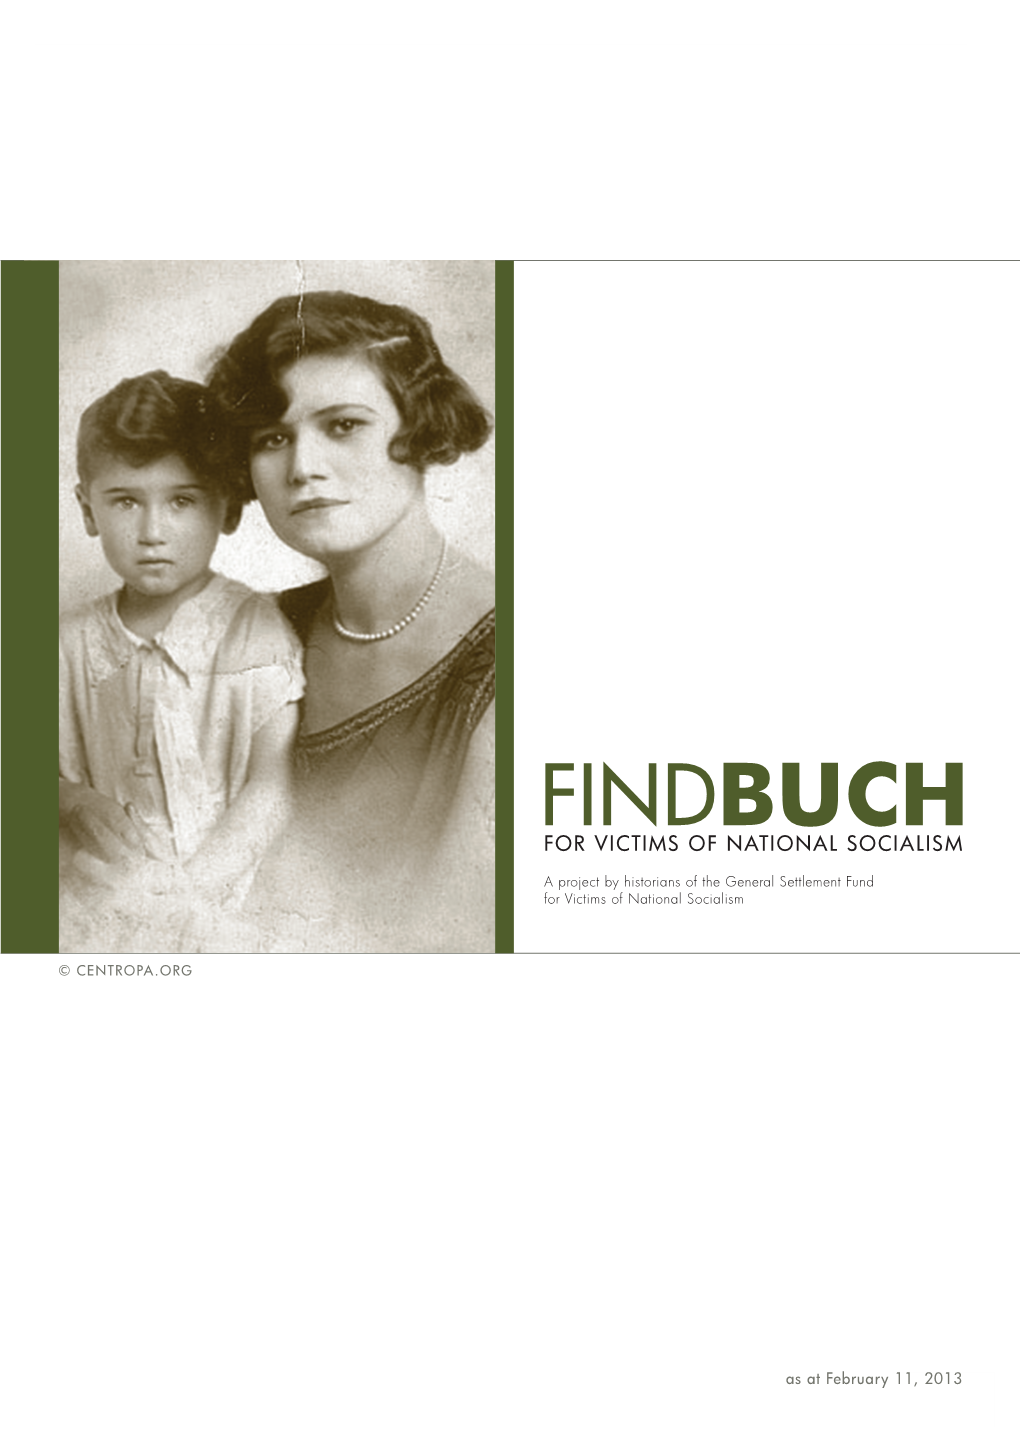 Findbuch for Victims of National Socialism